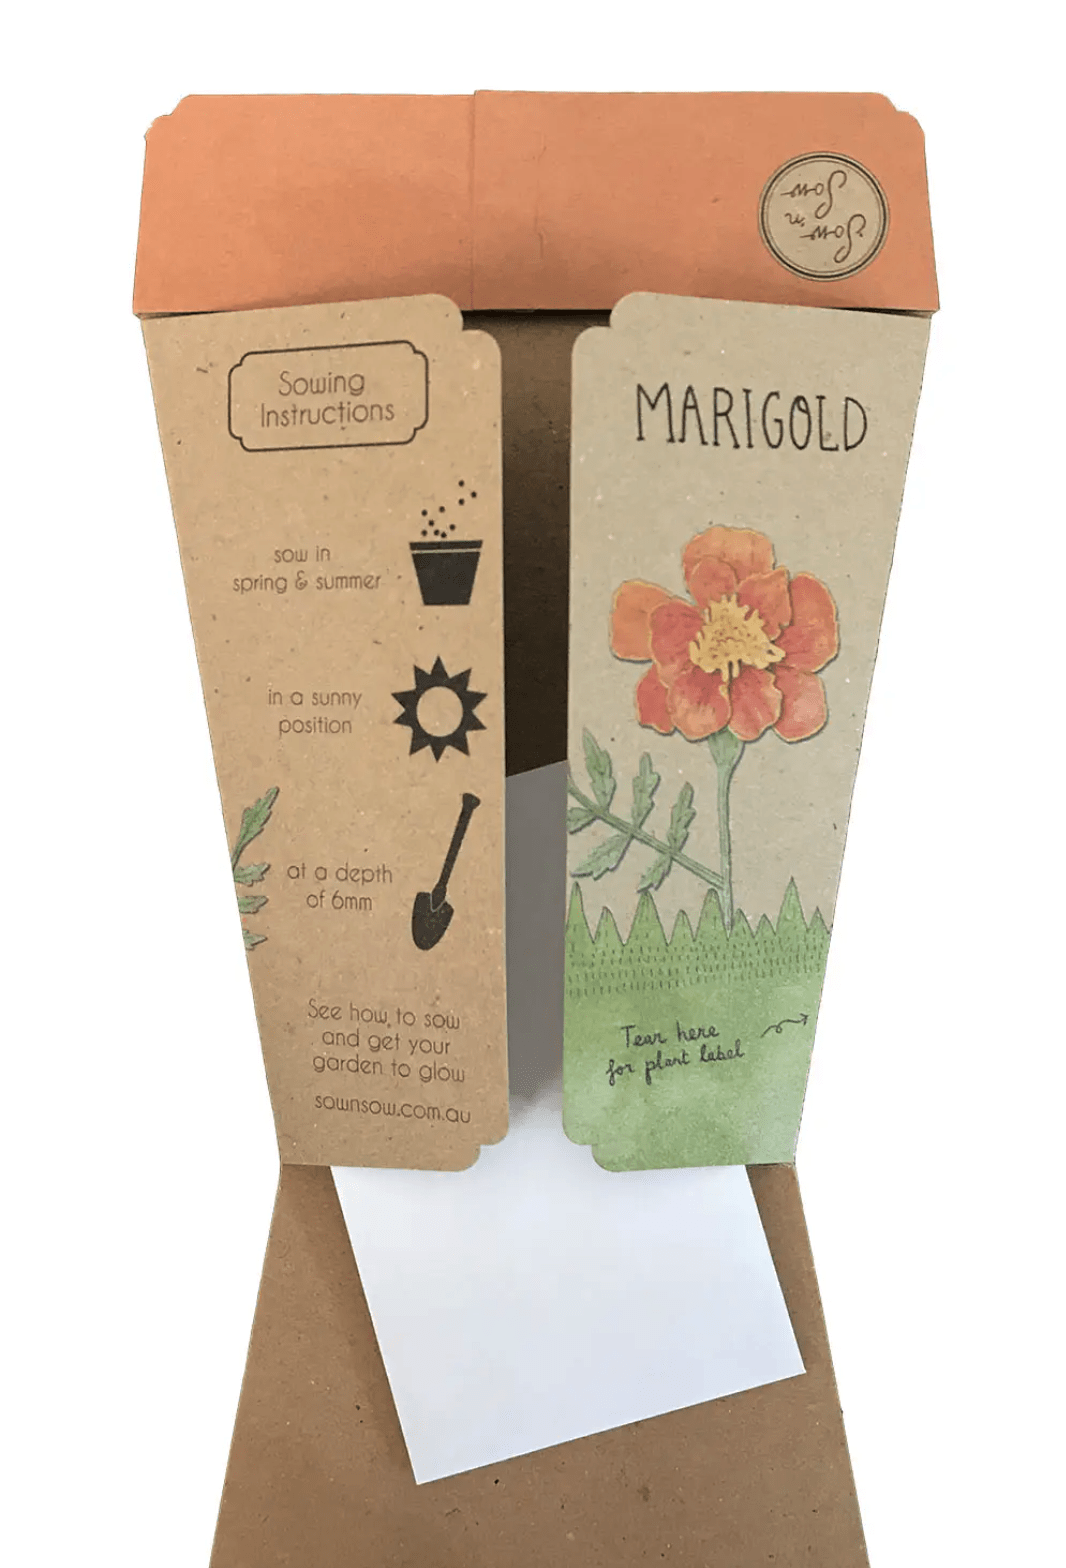 A Sow n Sow cardboard box with Marigold seeds and a note inside.